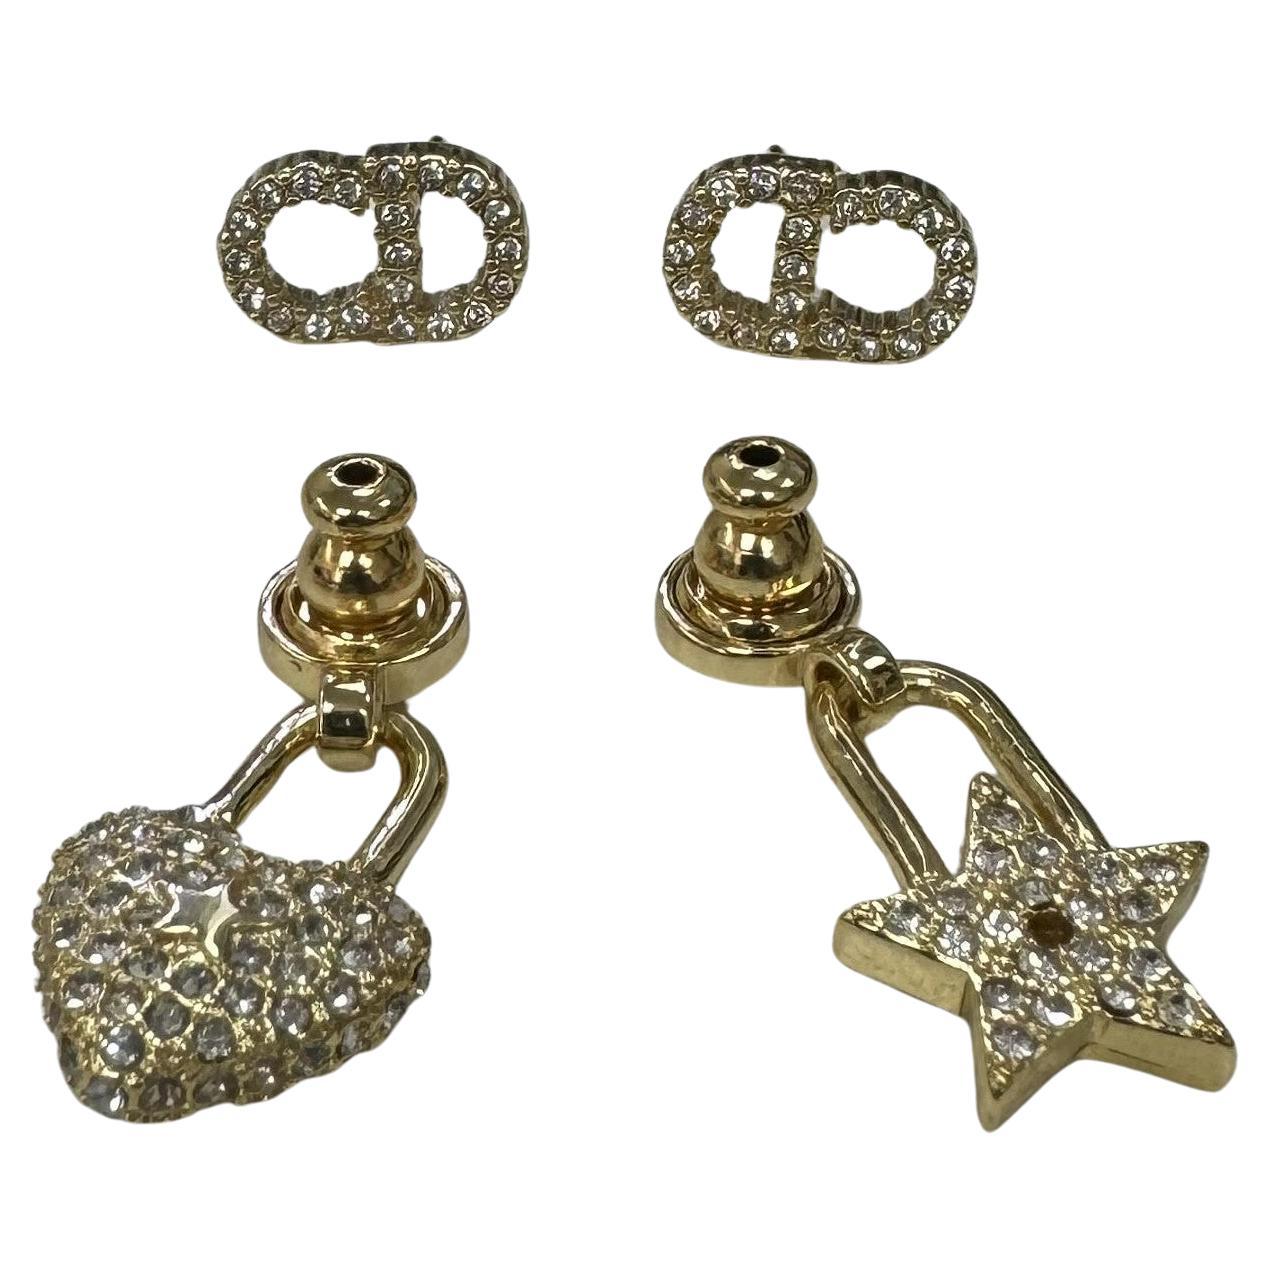 Christian Dior Heart and Star Earrings with Crystals over "CD"in Crystals